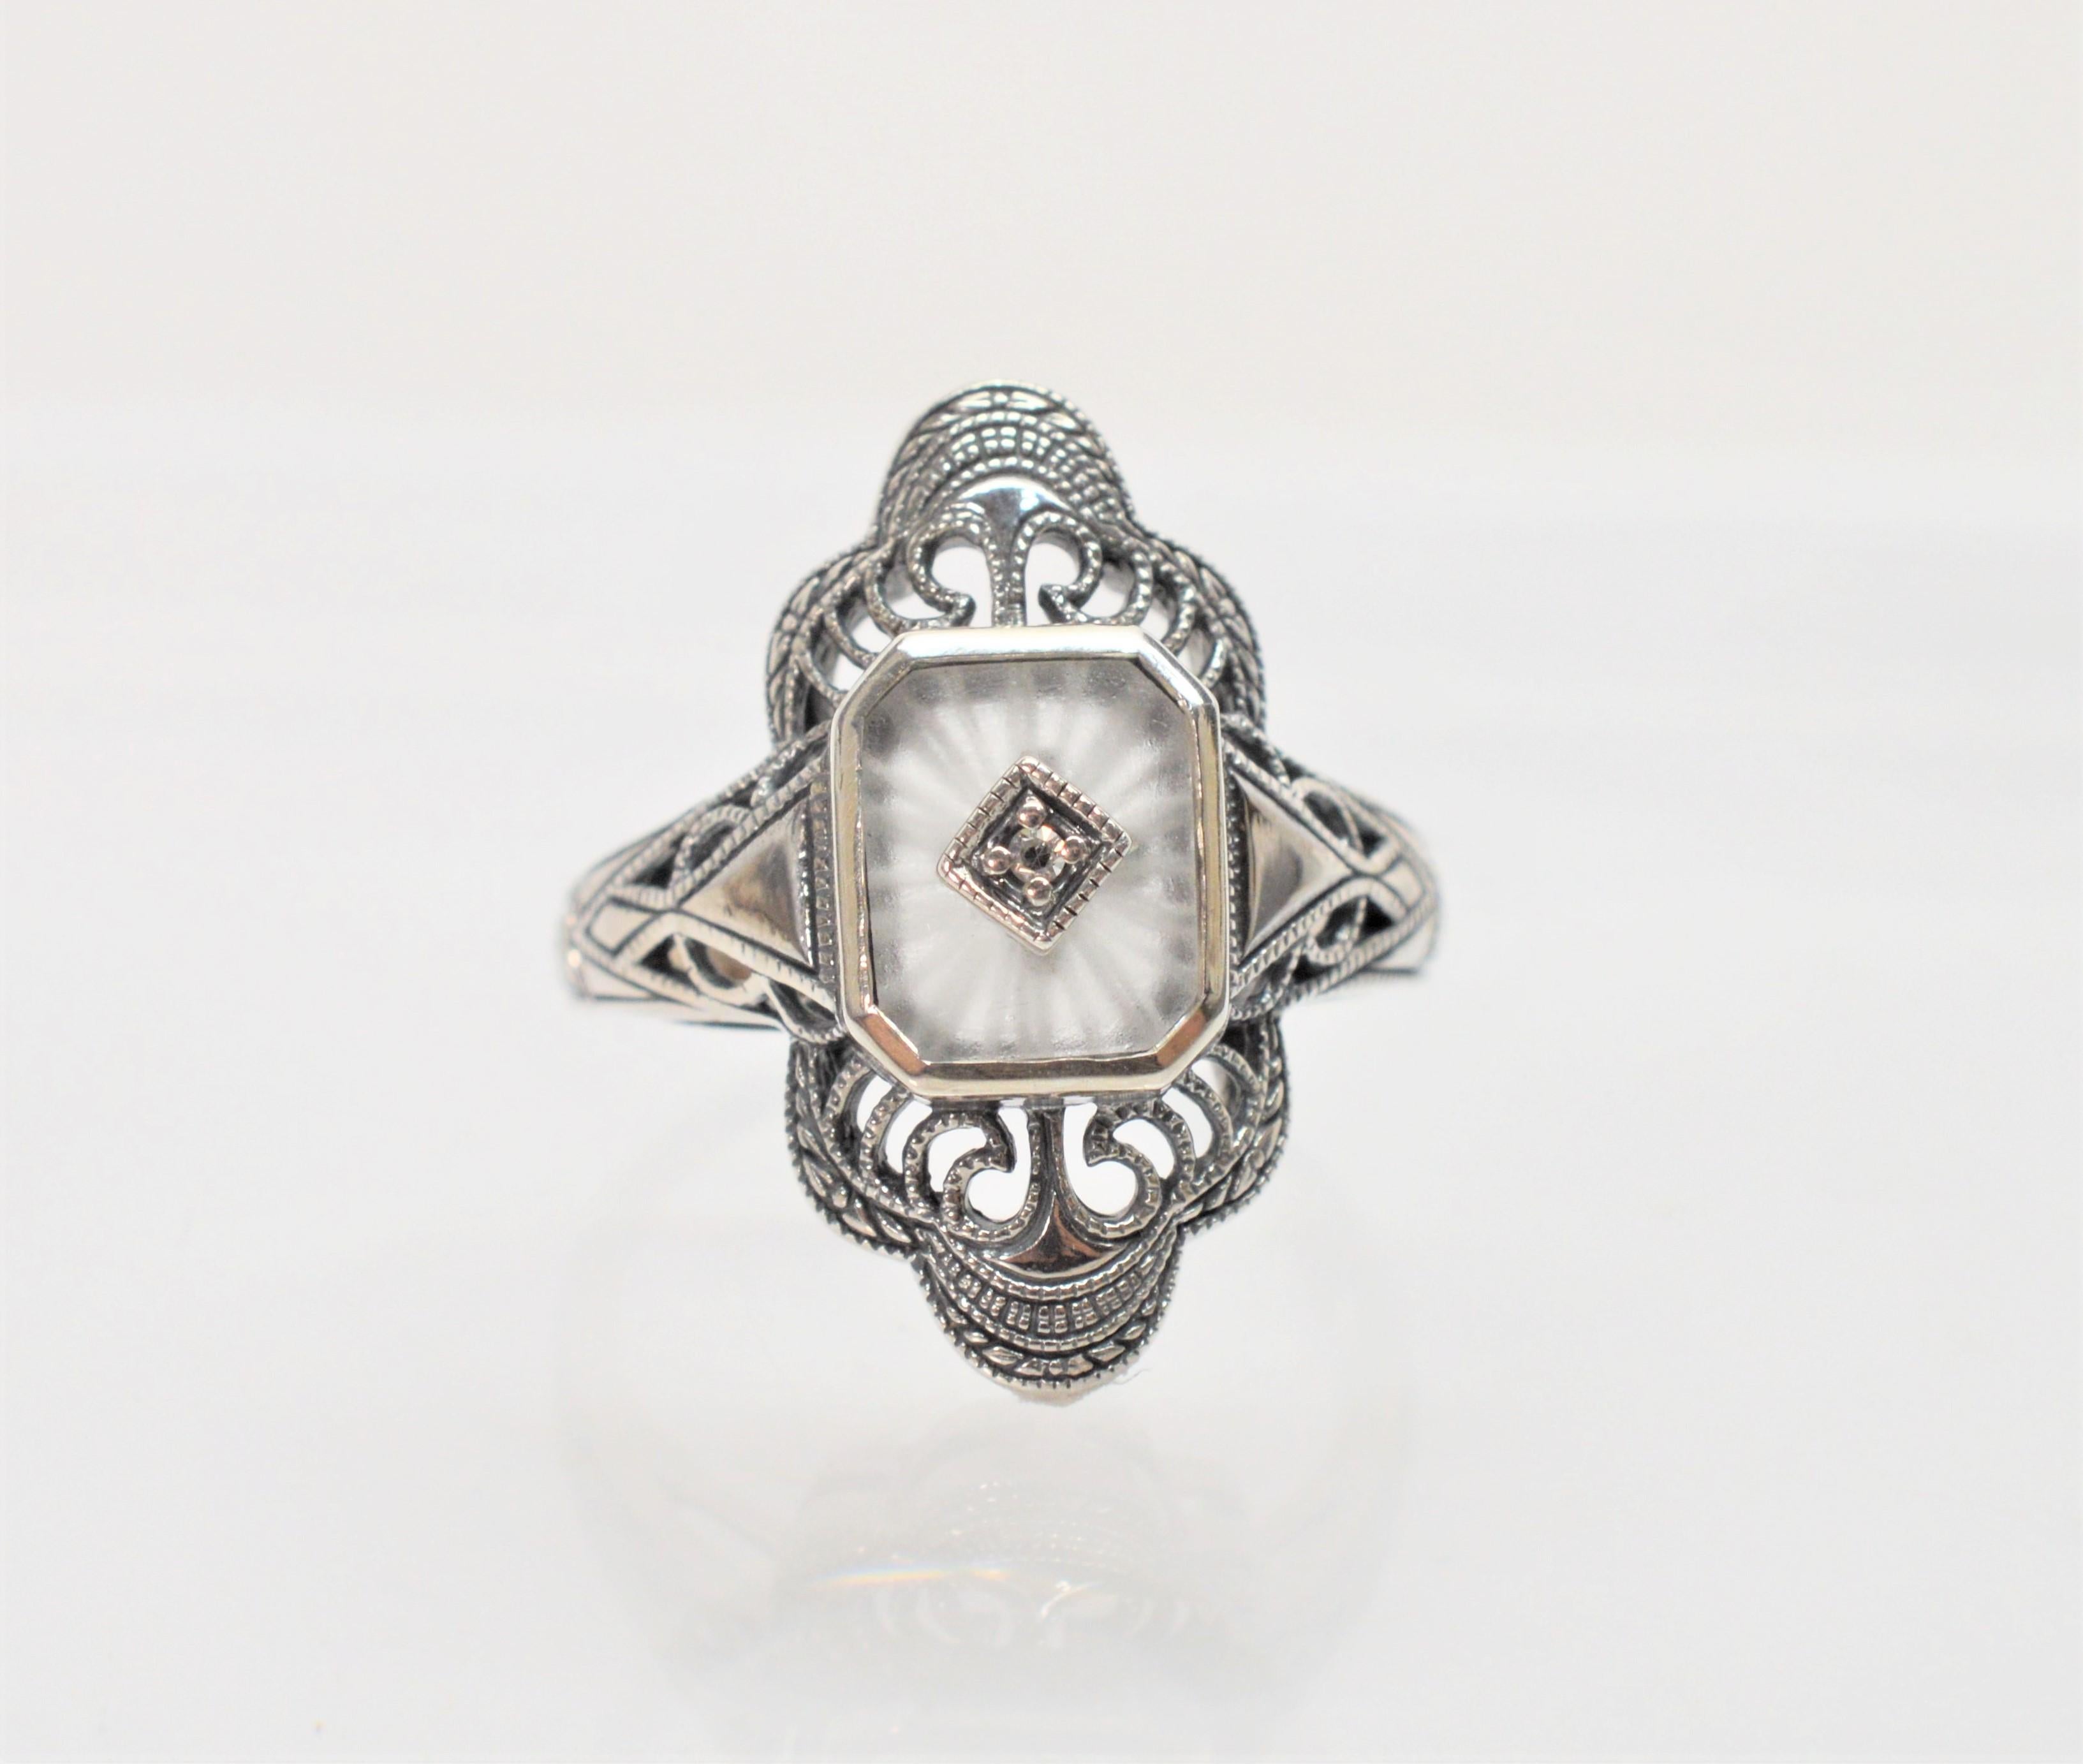 Sunray frosted camphor glass with a center diamond accent is framed with intricate .925 sterling silver filigree in the style of the Victorian period.
In size 7.5. New and presented in a miniature antique style gift box.